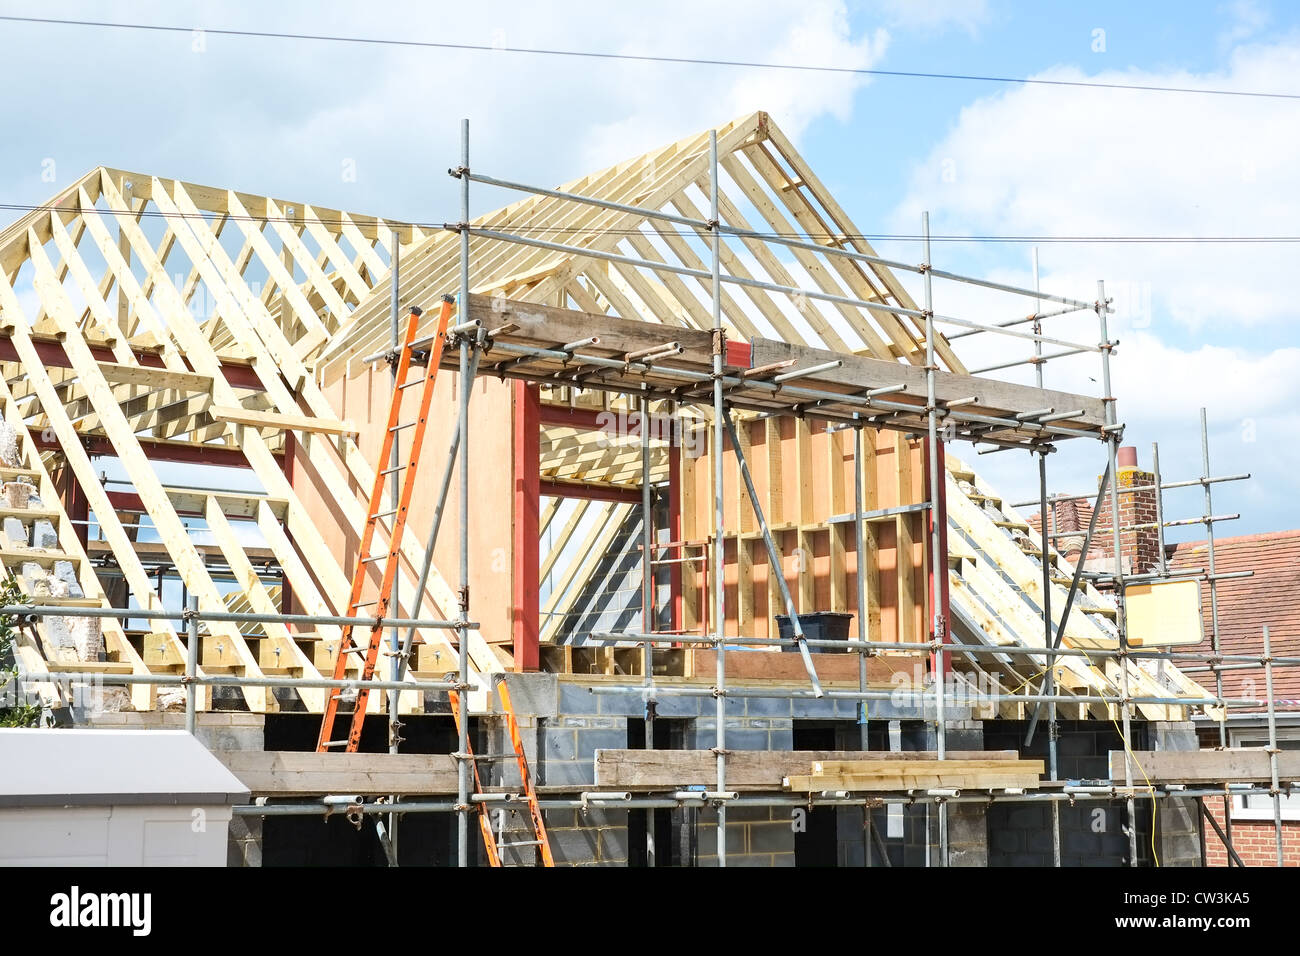 New house under construction with a large dormer roof, Stock Photo